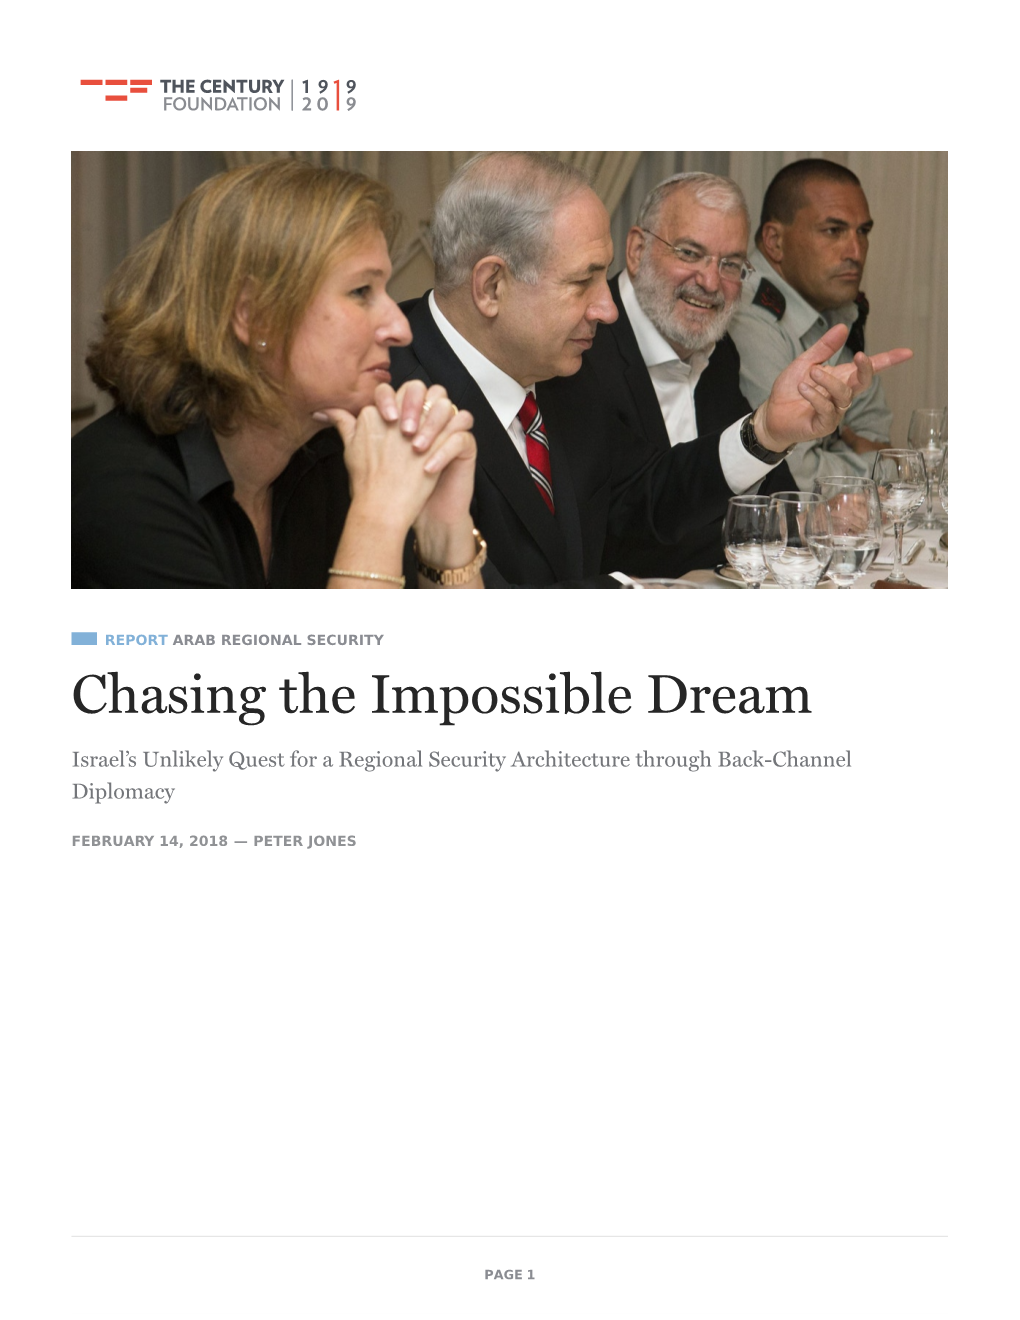 Chasing the Impossible Dream